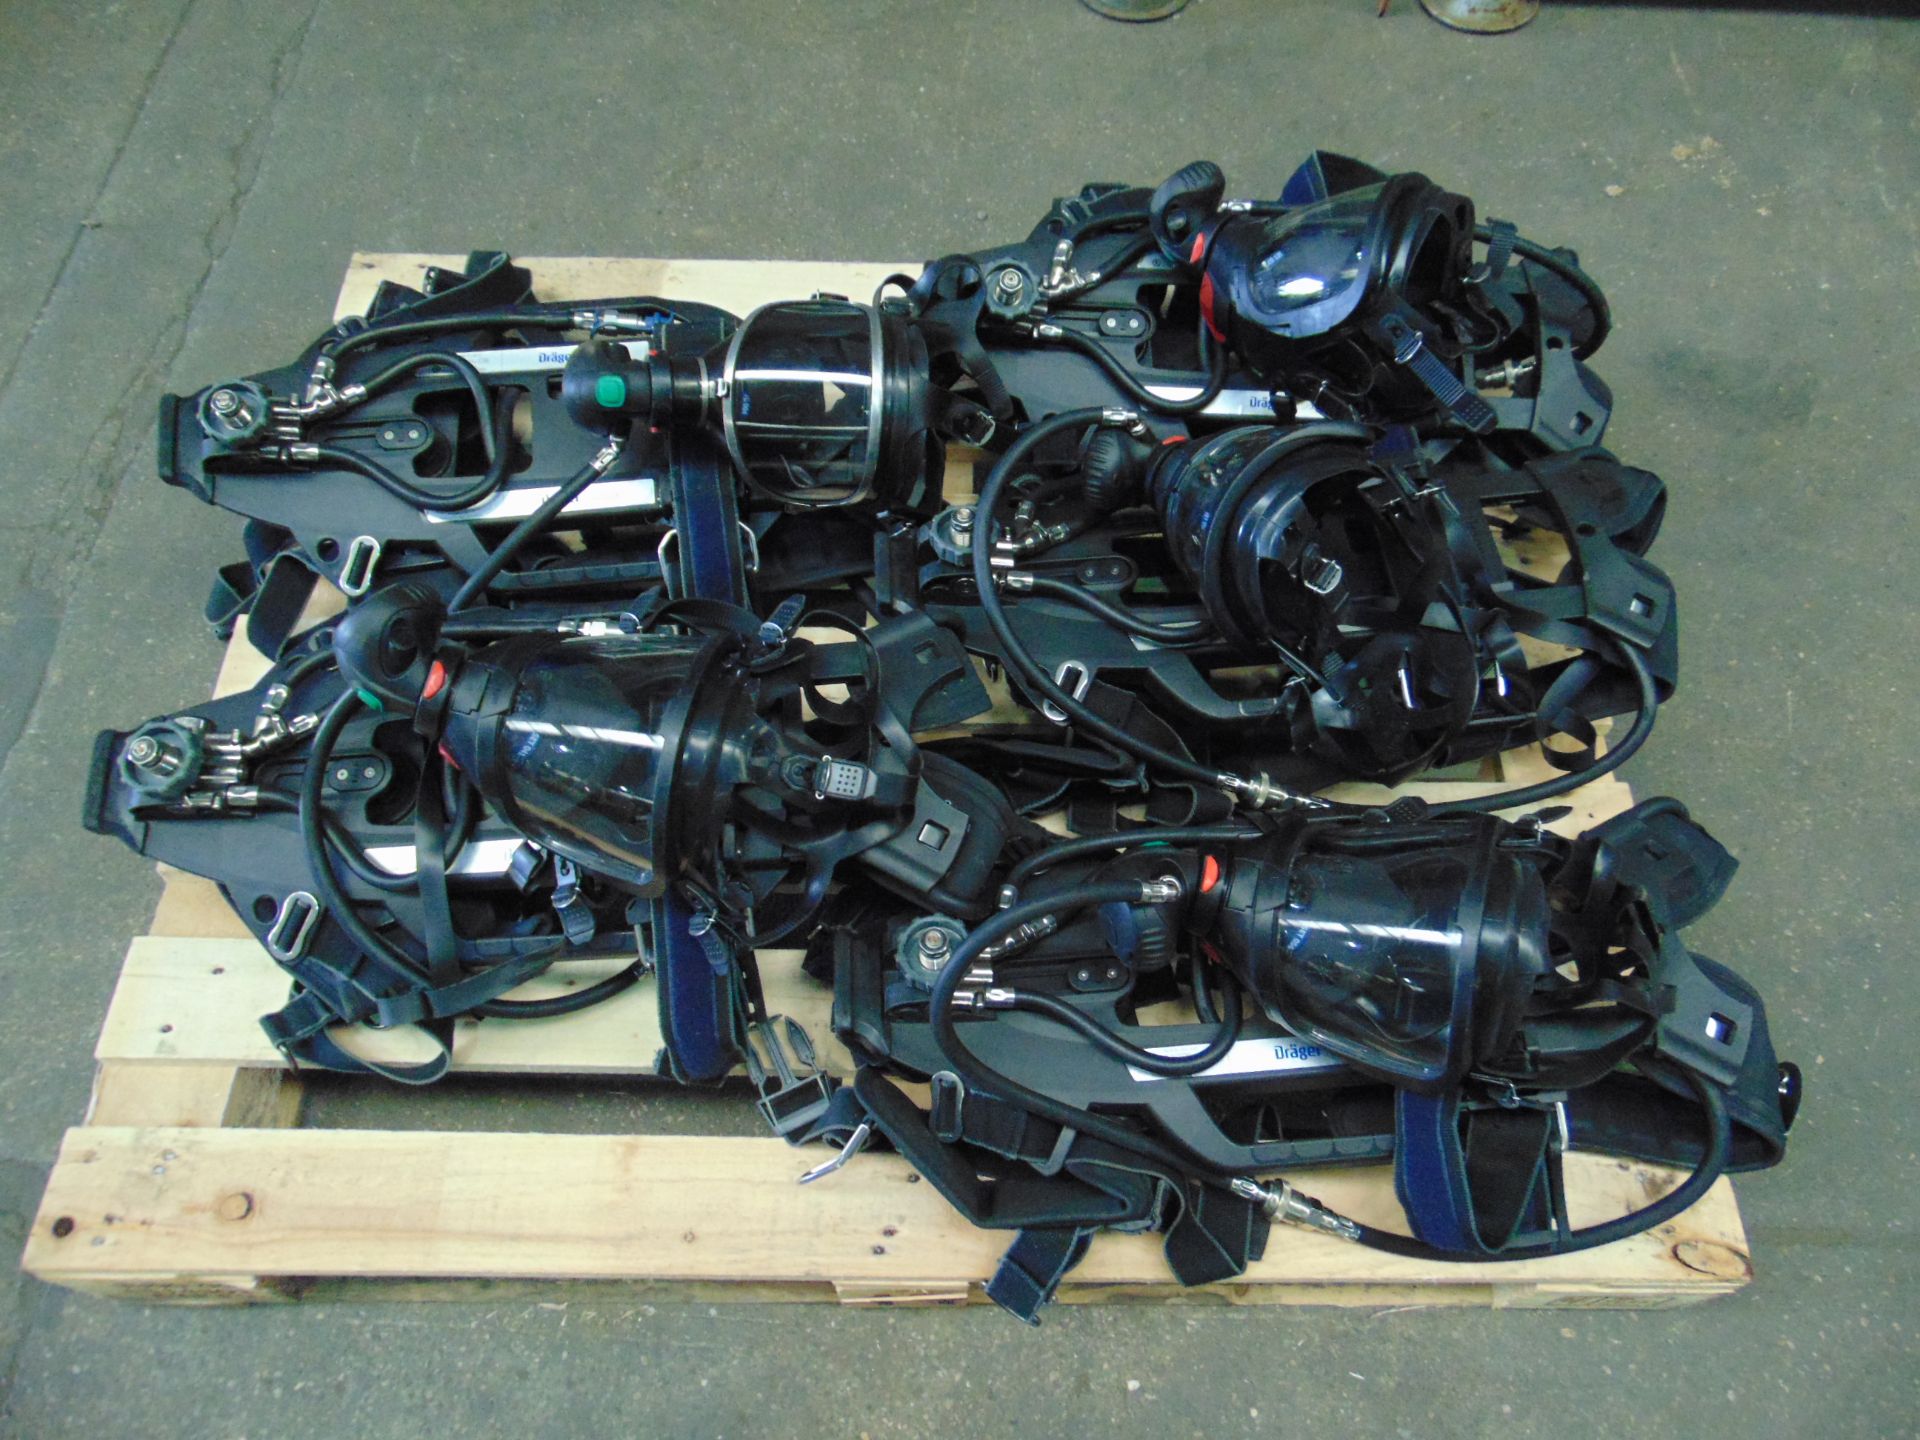 5 x Drager PSS 7000 Self Contained Breathing Apparatus w/ 10 x Drager 300 Bar Air Cylinders - Image 13 of 21